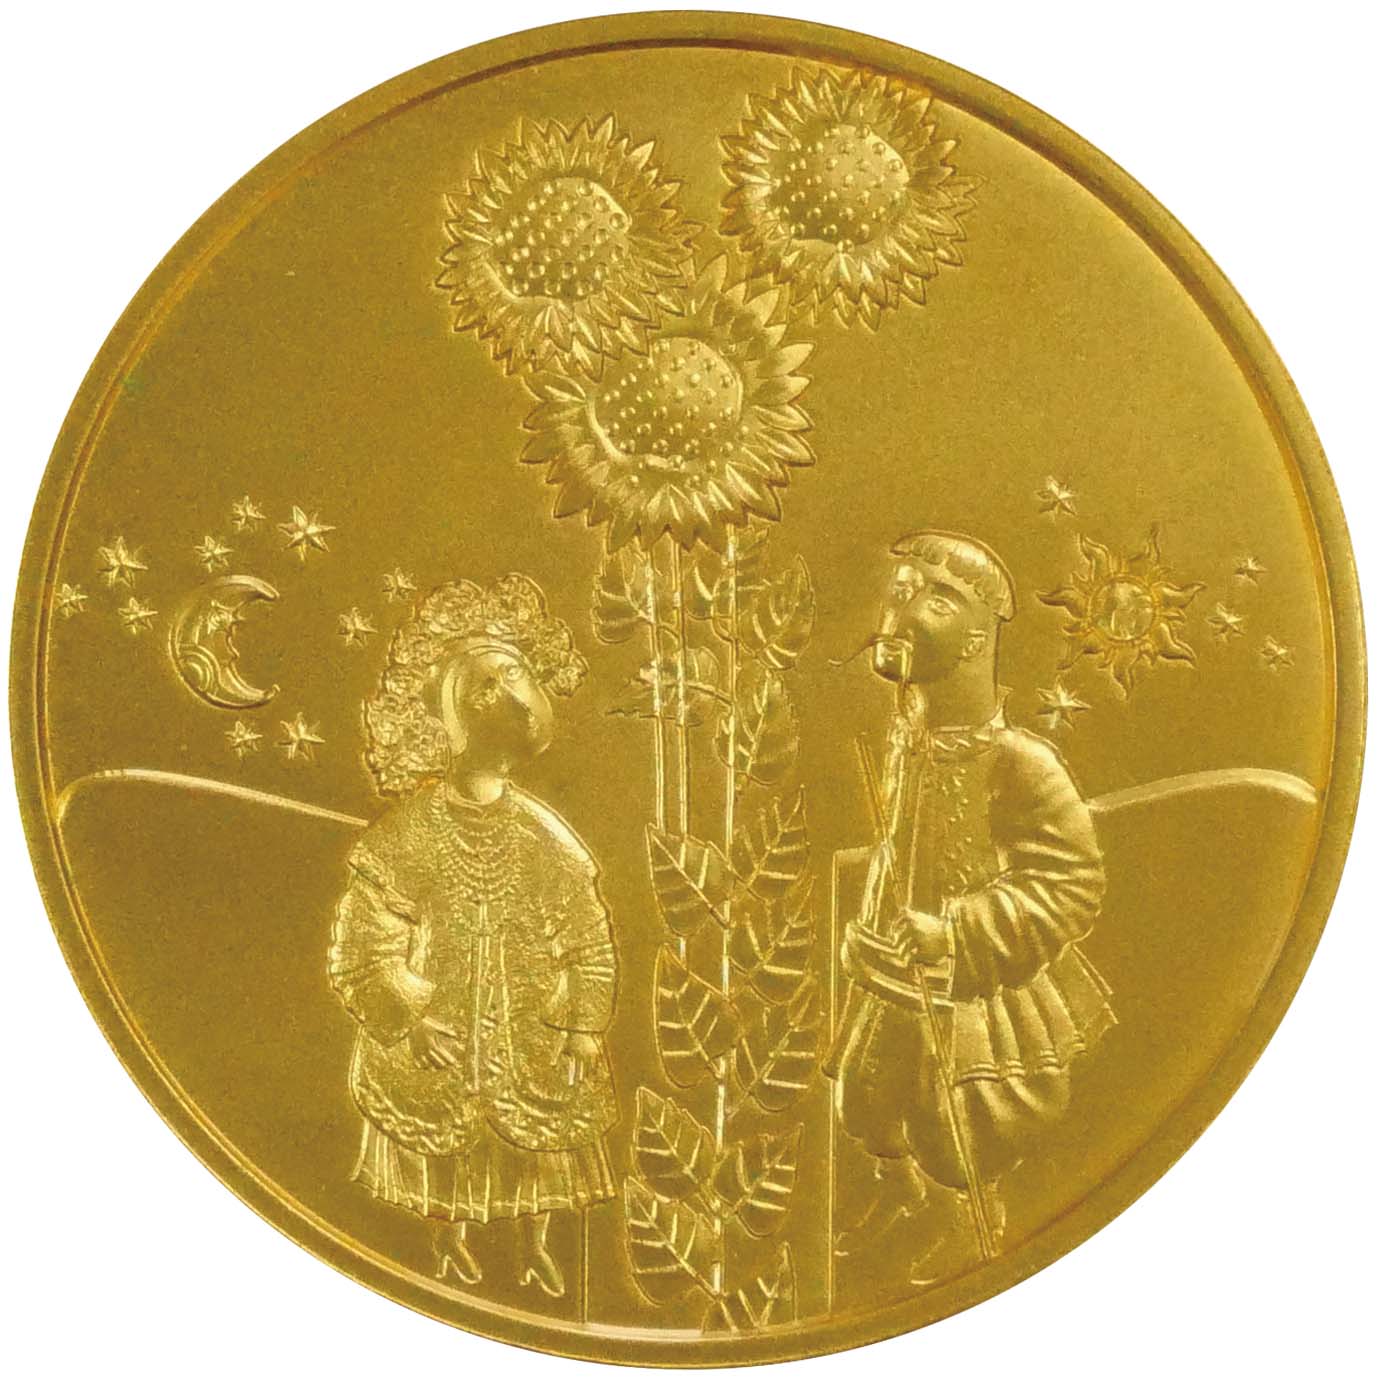 Image of International Coin Design Competition 2022 “Most Excellent Work” Gold Medal Obverse